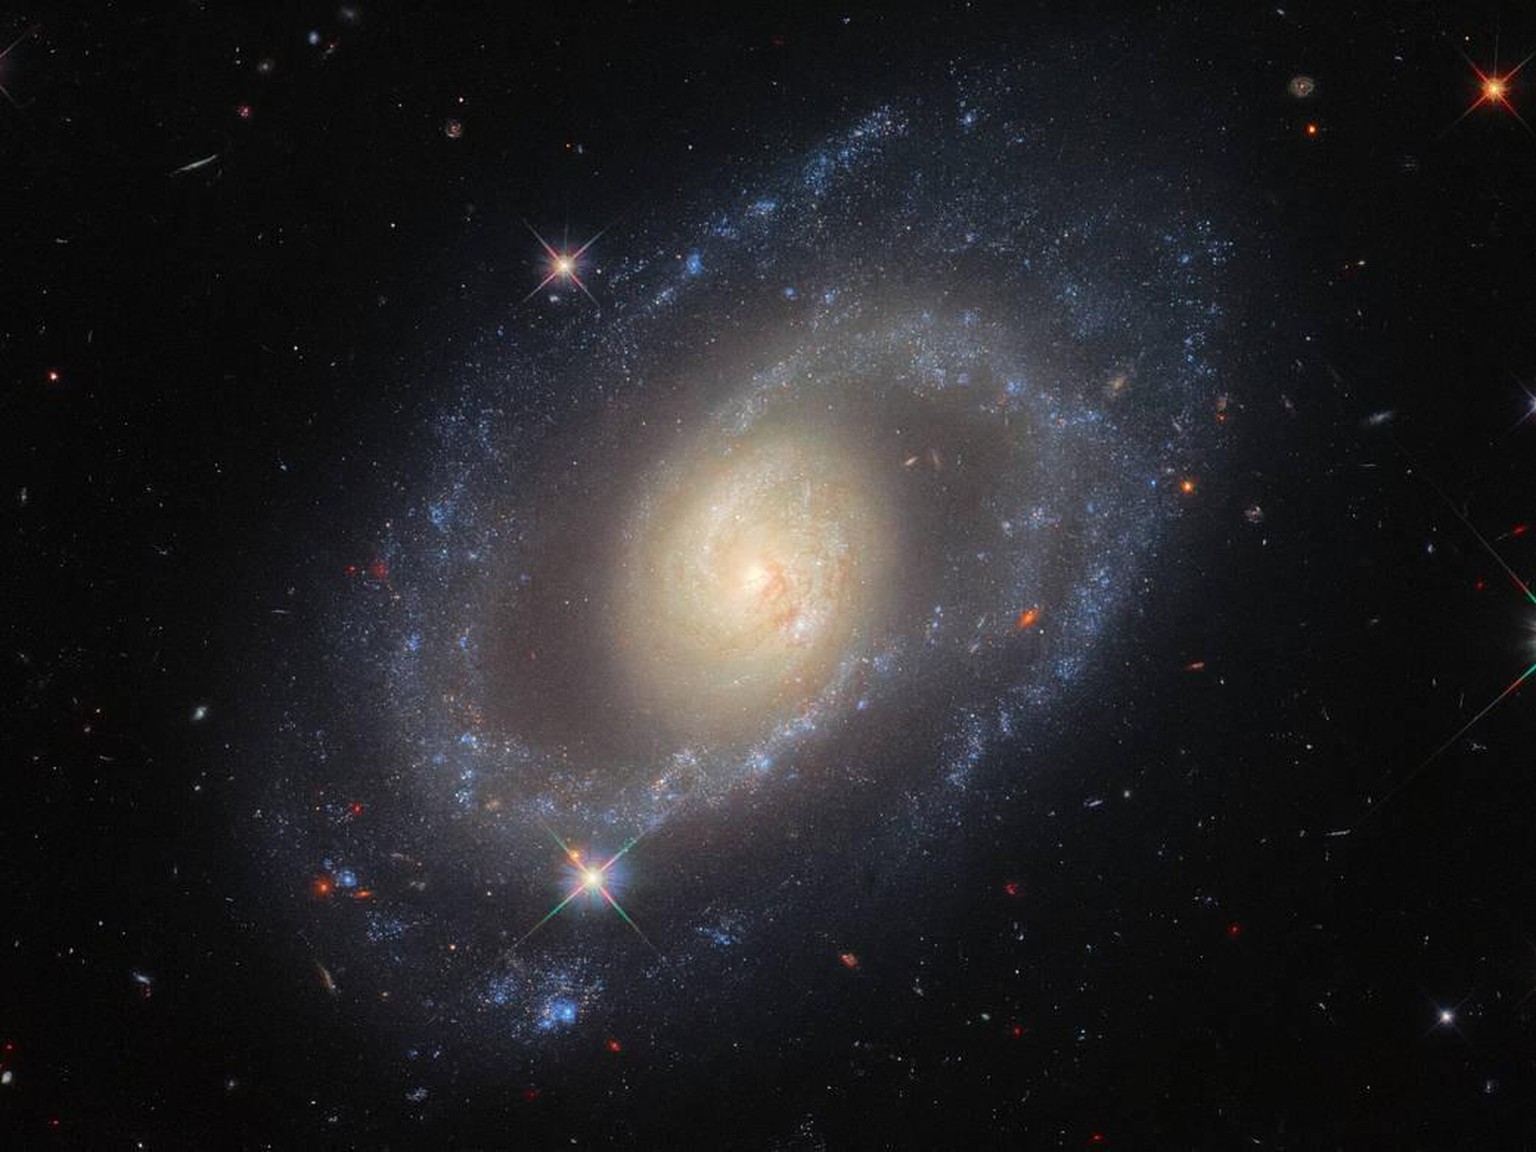 This image from the NASA/ESA Hubble Space Telescope features the spiral galaxy Mrk (Markarian) 1337, which is roughly 120 million light-years away from Earth in the constellation Virgo.
https://www.na ...